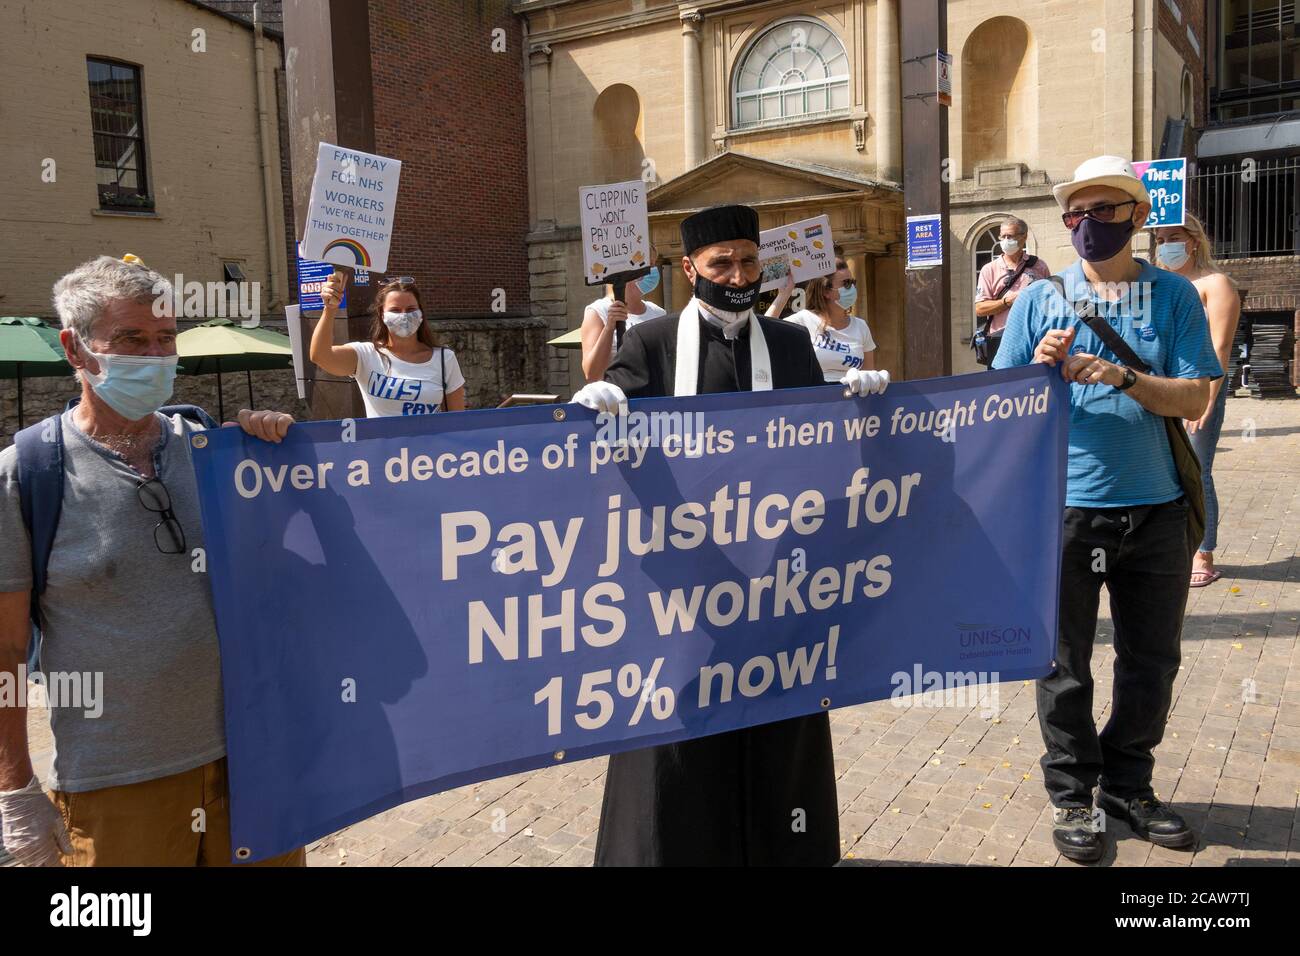 Oxford, UK. 8th August 2020. NHS workers and supporters attended a rally in Oxford’s Bonn Square calling for pay justice for all NHS workers, protesting to demand a pay rise to reflect their efforts during the covid pandemic This was one of around 38 similar rallies held throughout the UK. The protestors maintained social distancing and wore masks. While listening to speakers many held placards that highlighted their grievances and how they felt under valued. Pictured, NHS supporters  holding banner - Pay Justice For NHS Workers 15% Now! Credit: Stephen Bell/Alamy Stock Photo